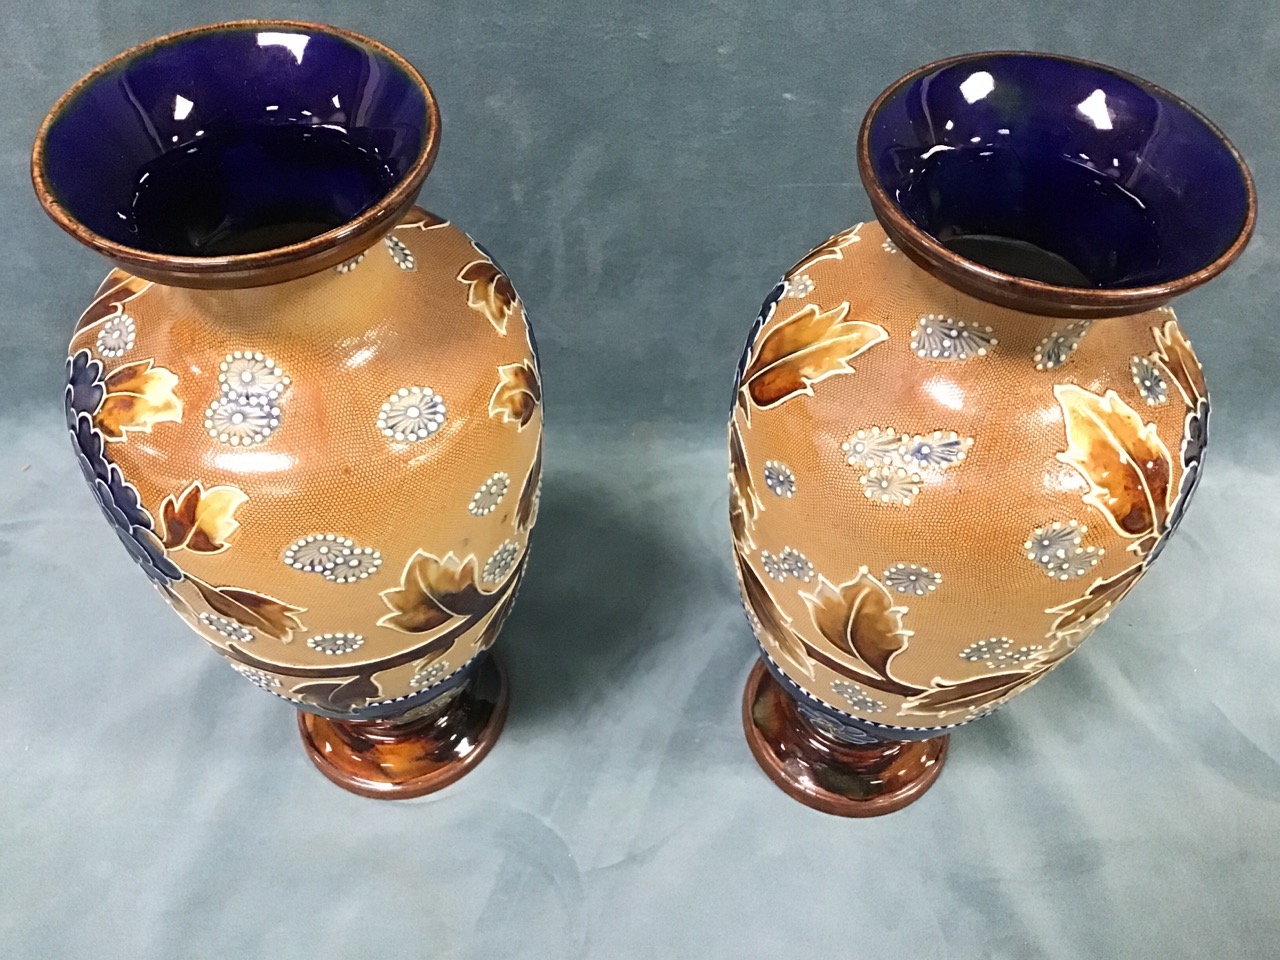 A pair of Doulton Lambeth stoneware vases, with tubelined decoration of peonies and flowerheads by - Image 3 of 3